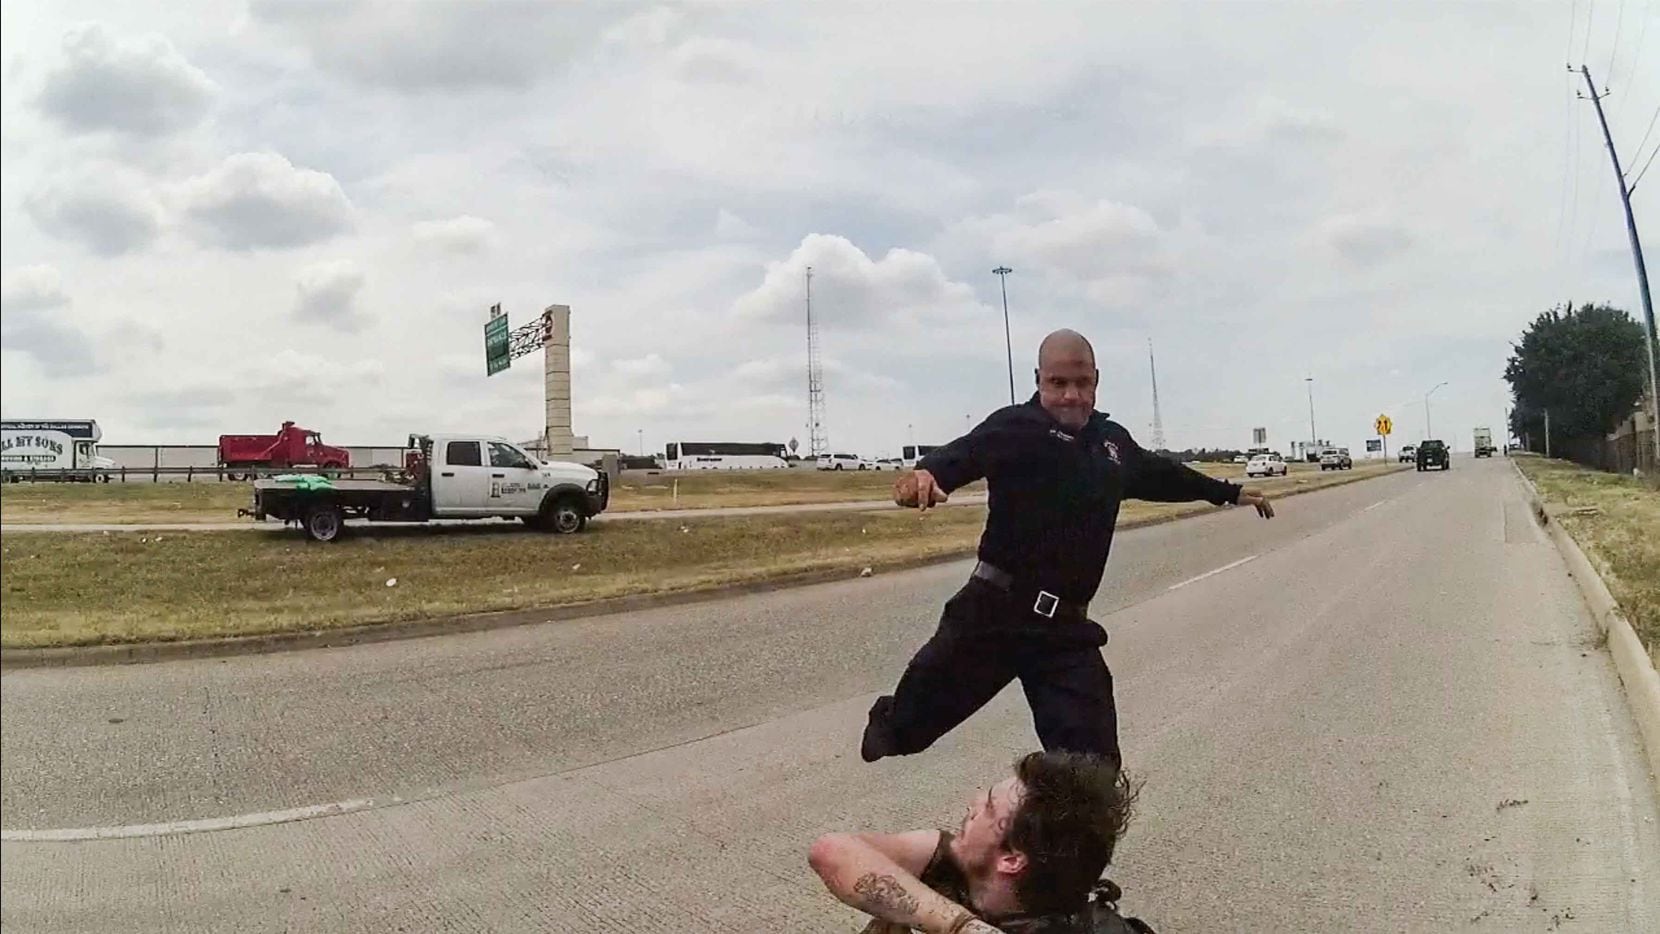 A frame from a police body cam shows Dallas firefighter Brad Cox during an altercation with...